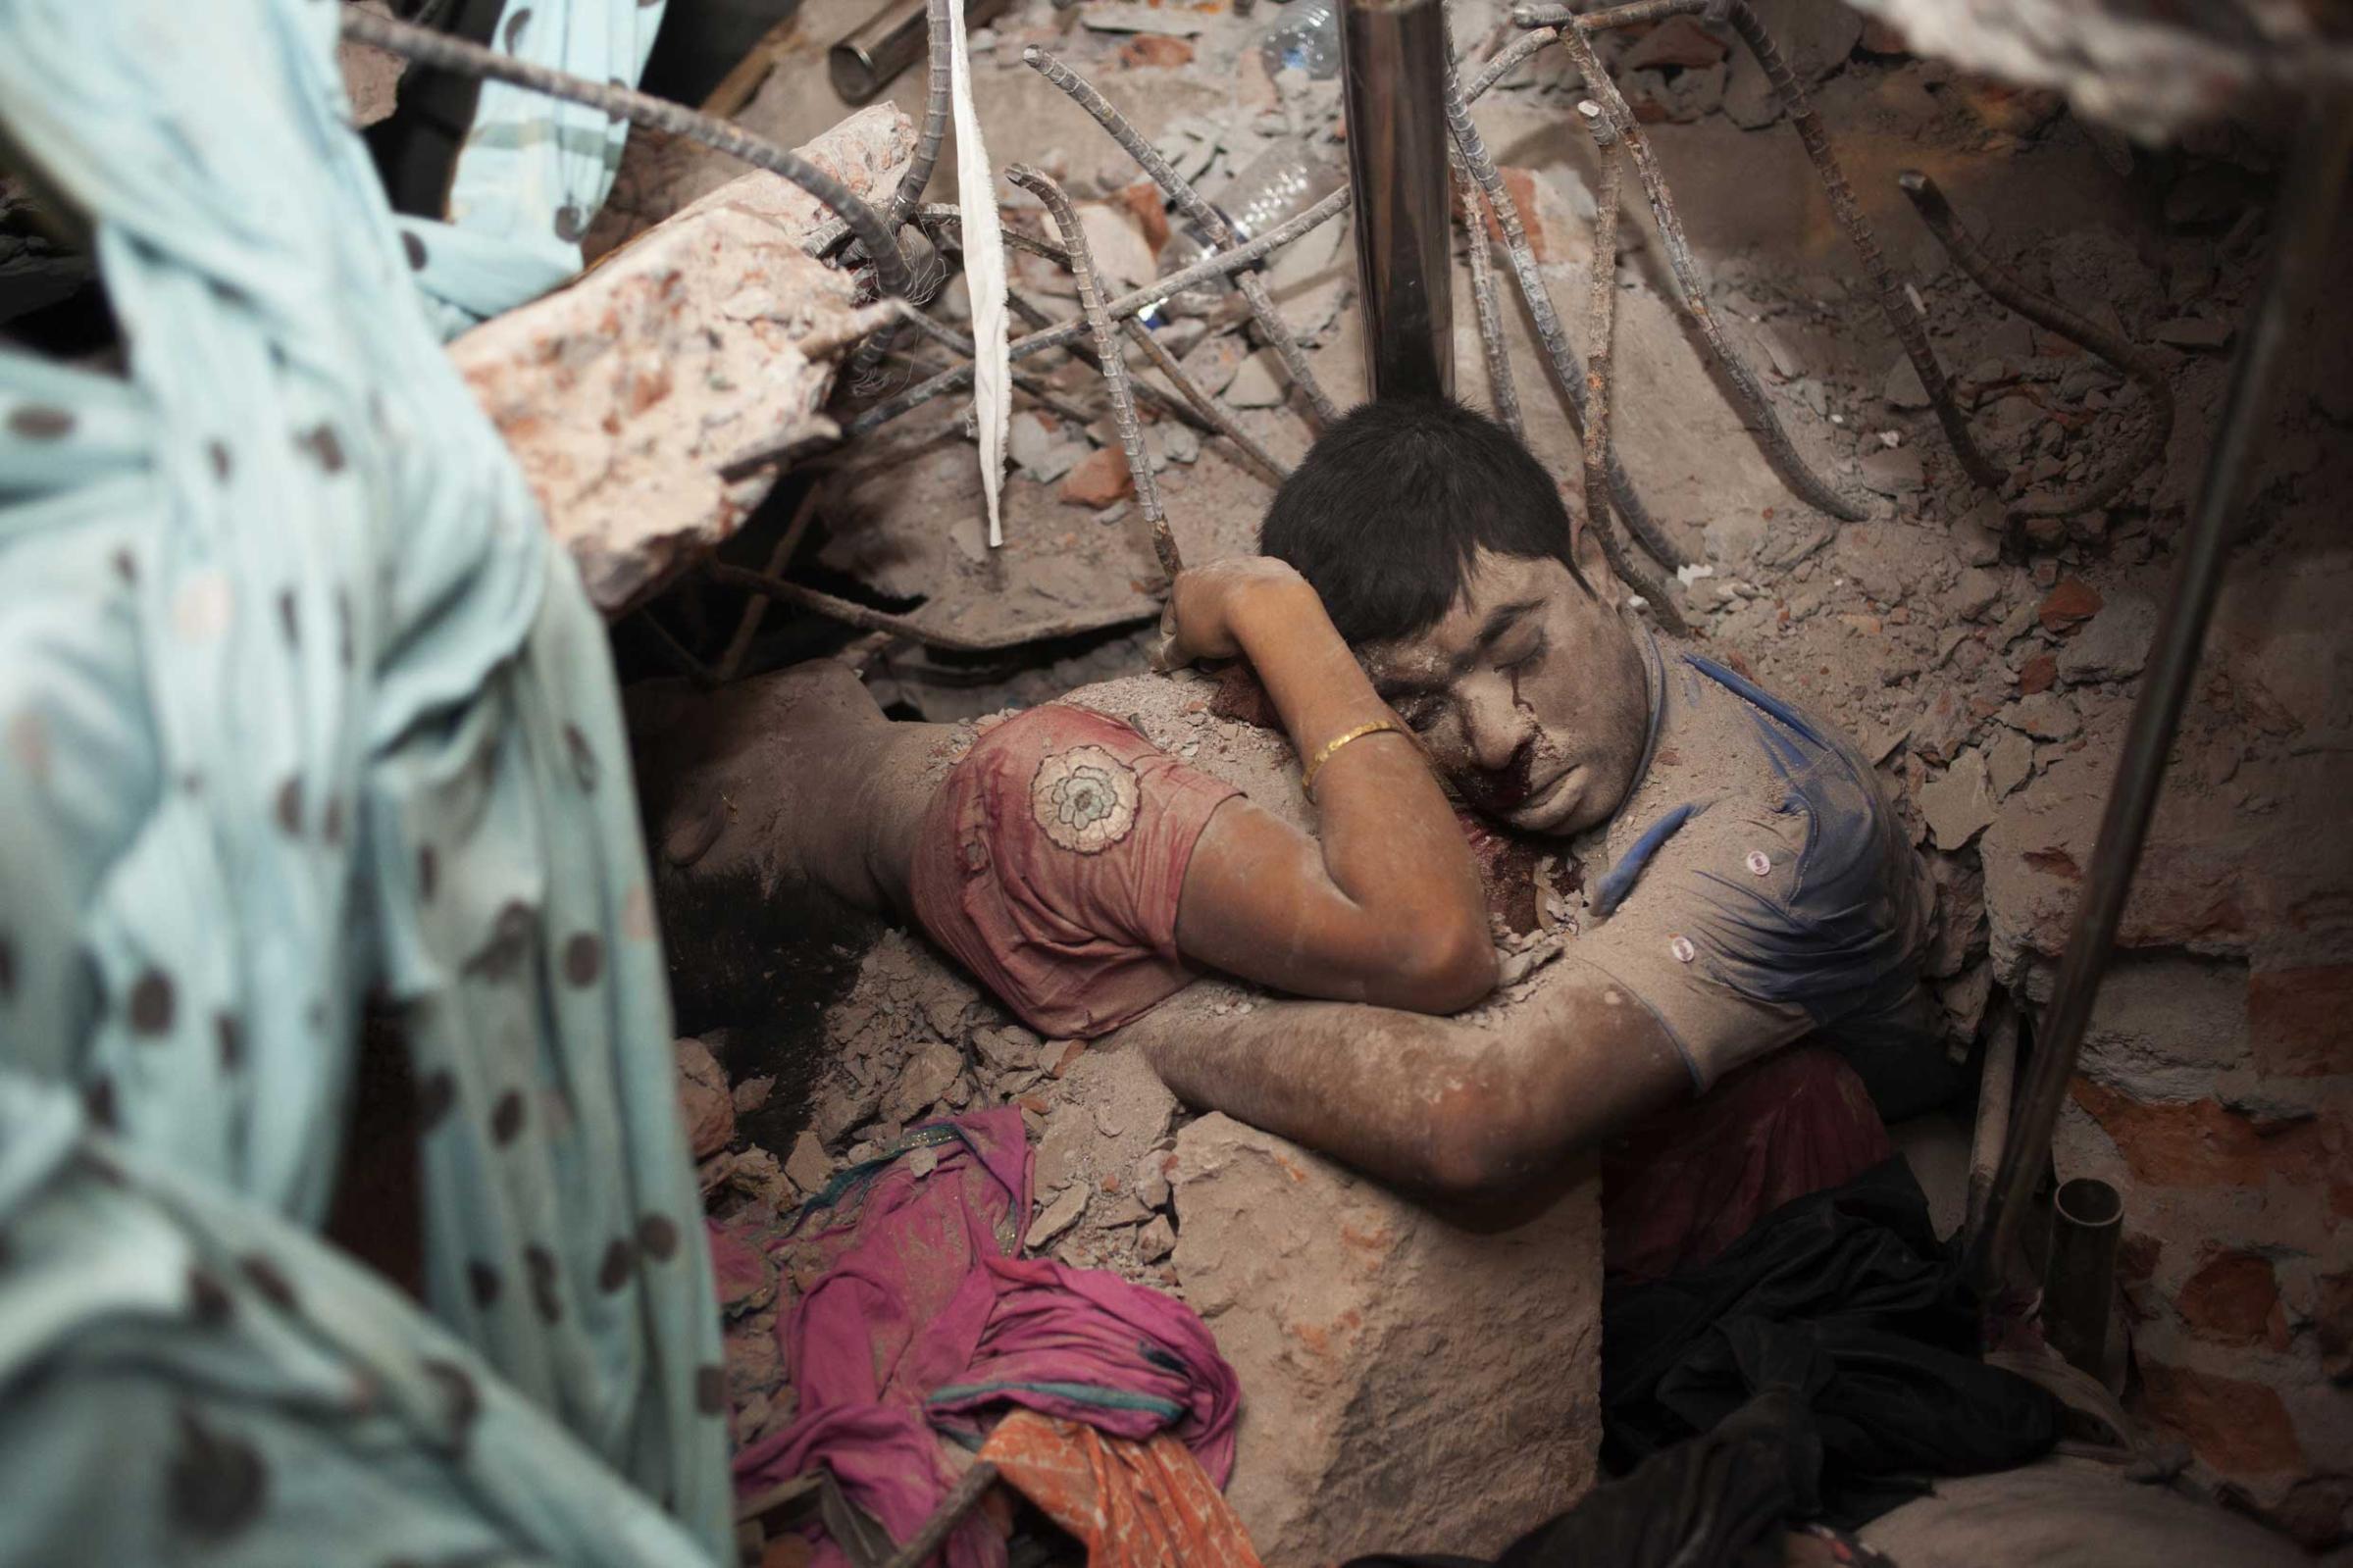 3rd Prize Spot New Singles. 25 April 2013, Dhaka, Bangladesh. Victims of garment factory collapse.